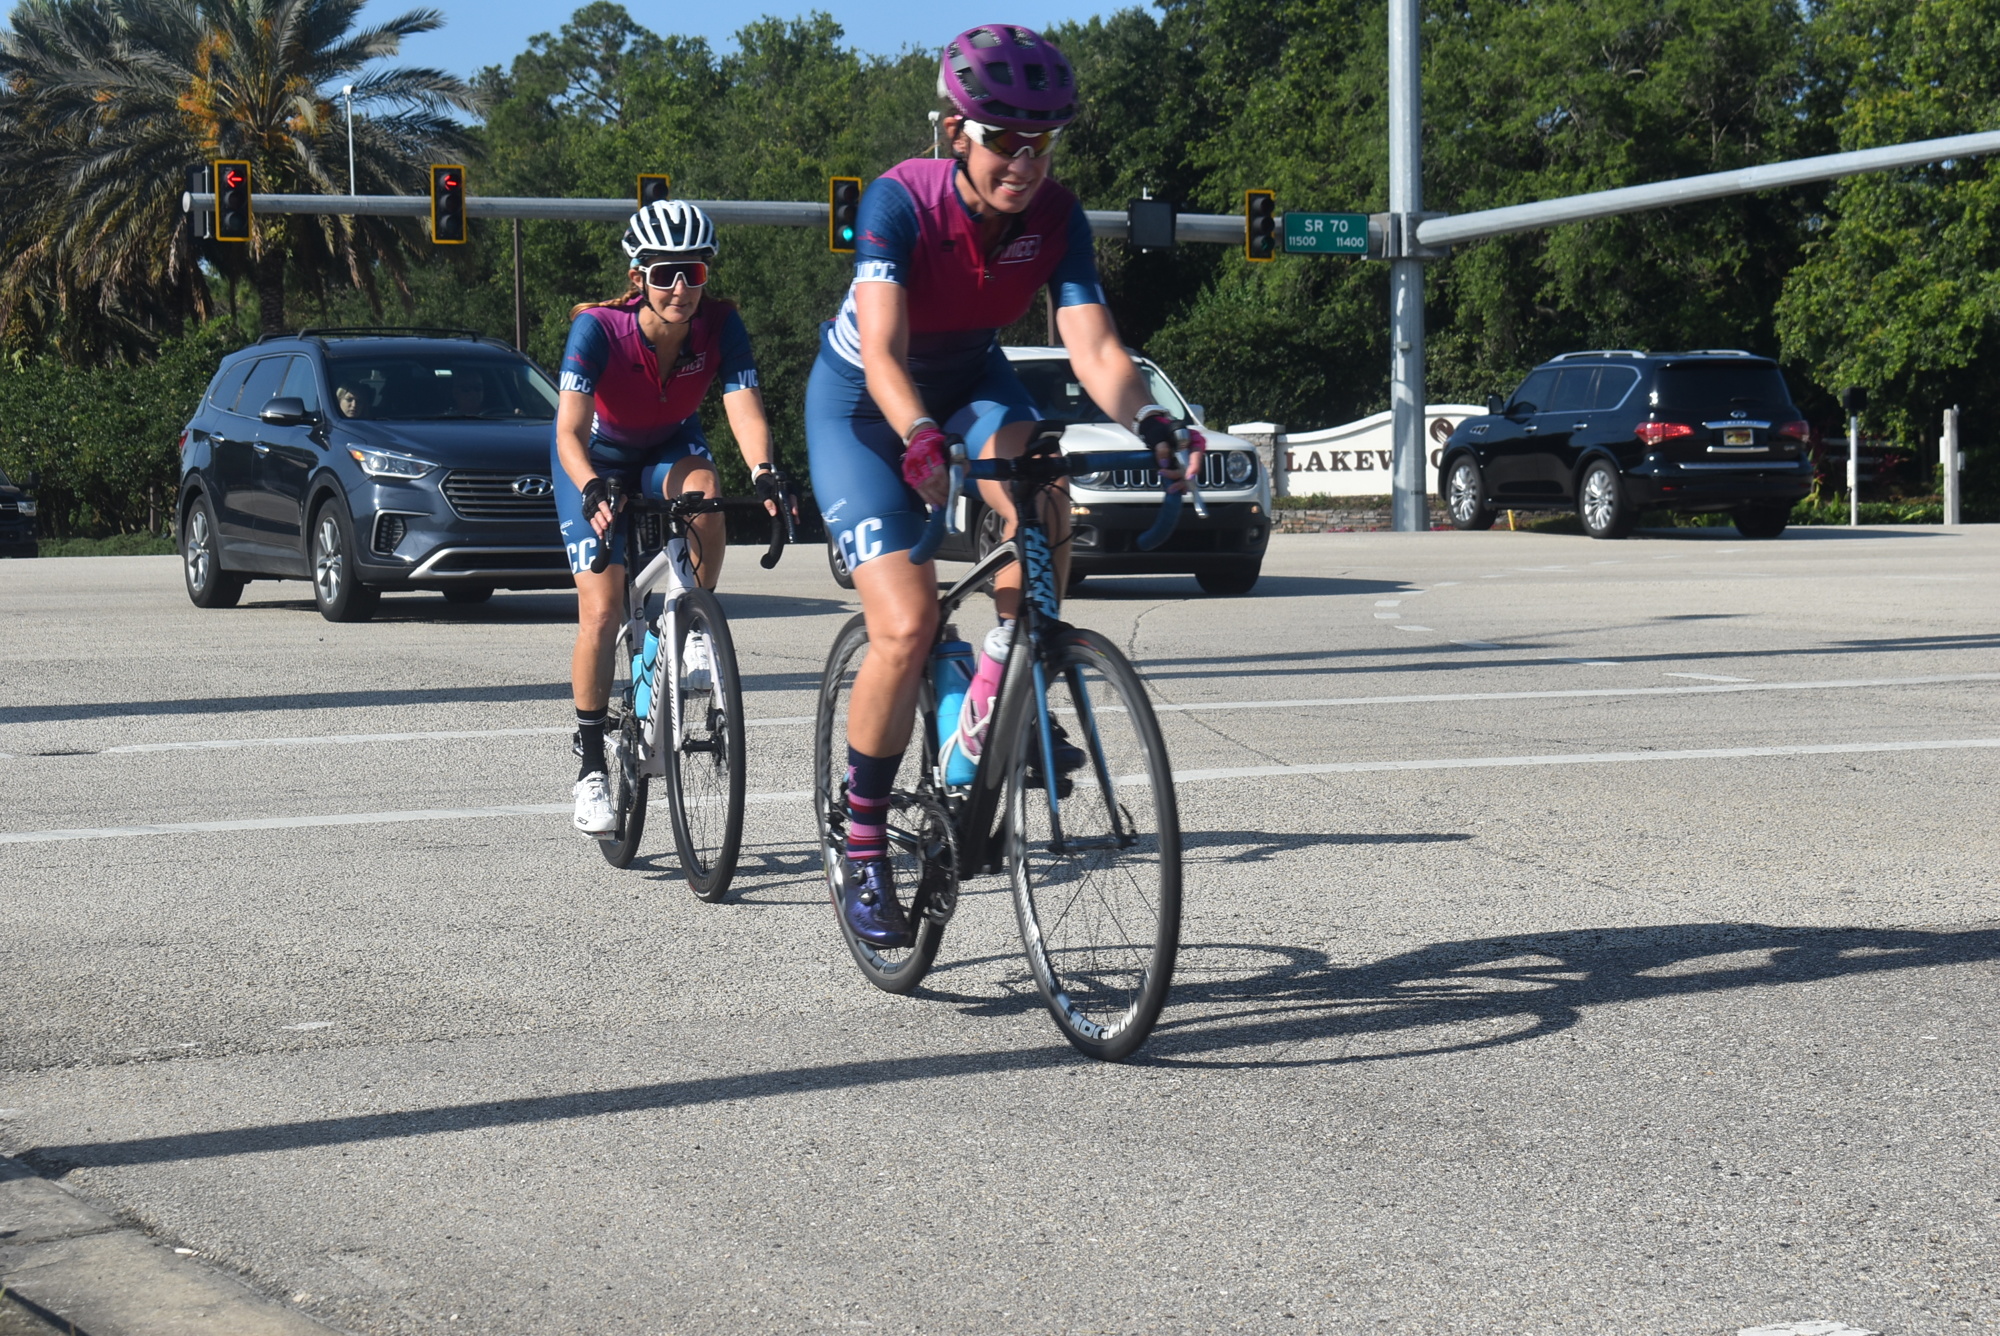 Village Idiots Cycling Club members Andrea Sacchetti and Dawn Zielinski finish crossing State Road 70 on Lakewood Ranch Boulevard. A bike lane will soon be reinstated at the intersection on southbound Lakewood Ranch Boulevard.